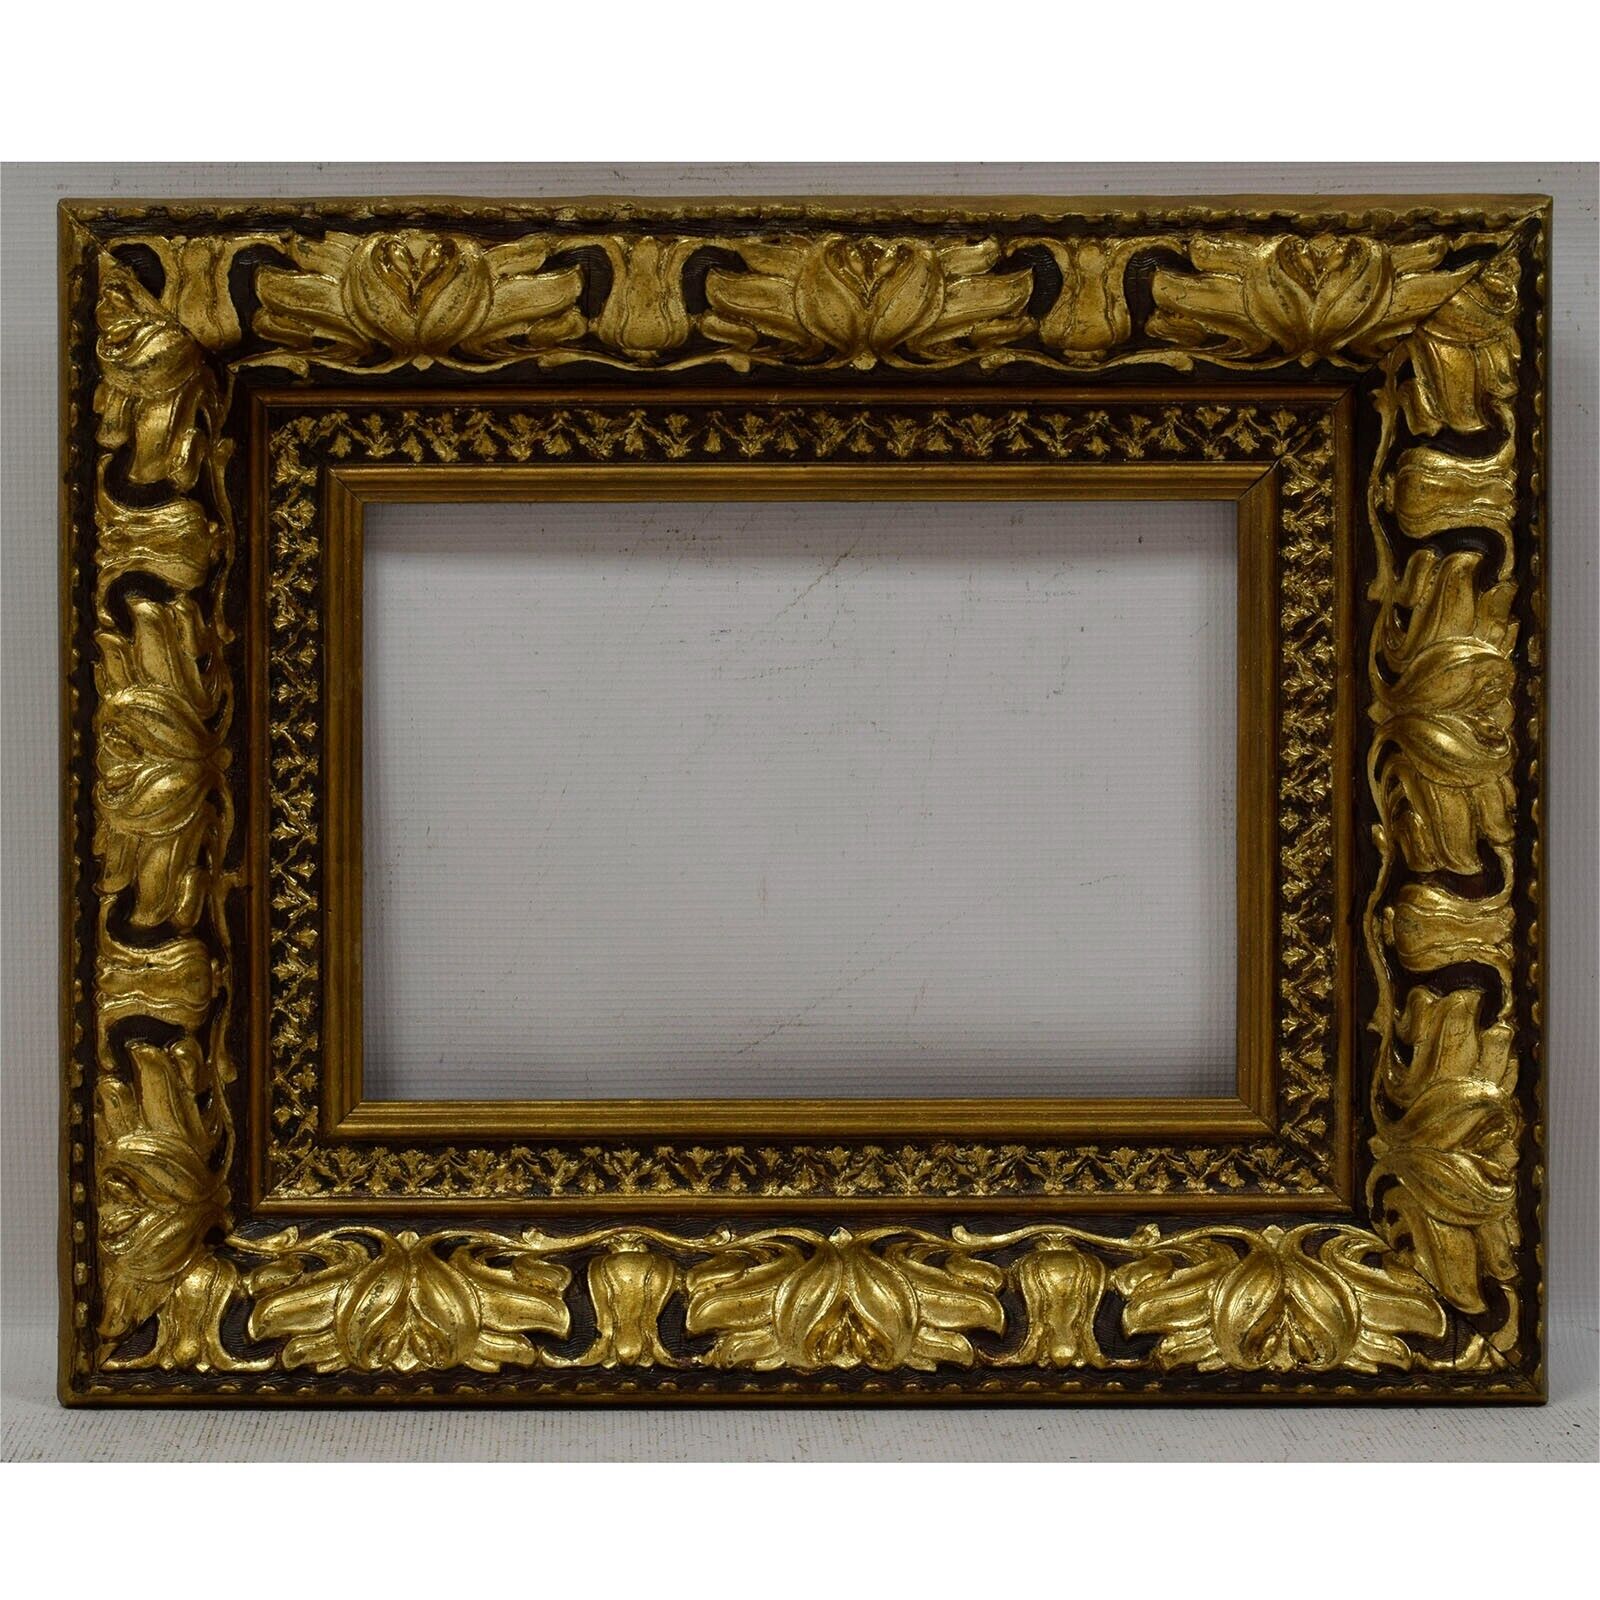 Ca.1900-1910 Old wooden frame decorative with metal leaf Internal: 12x8.4 in